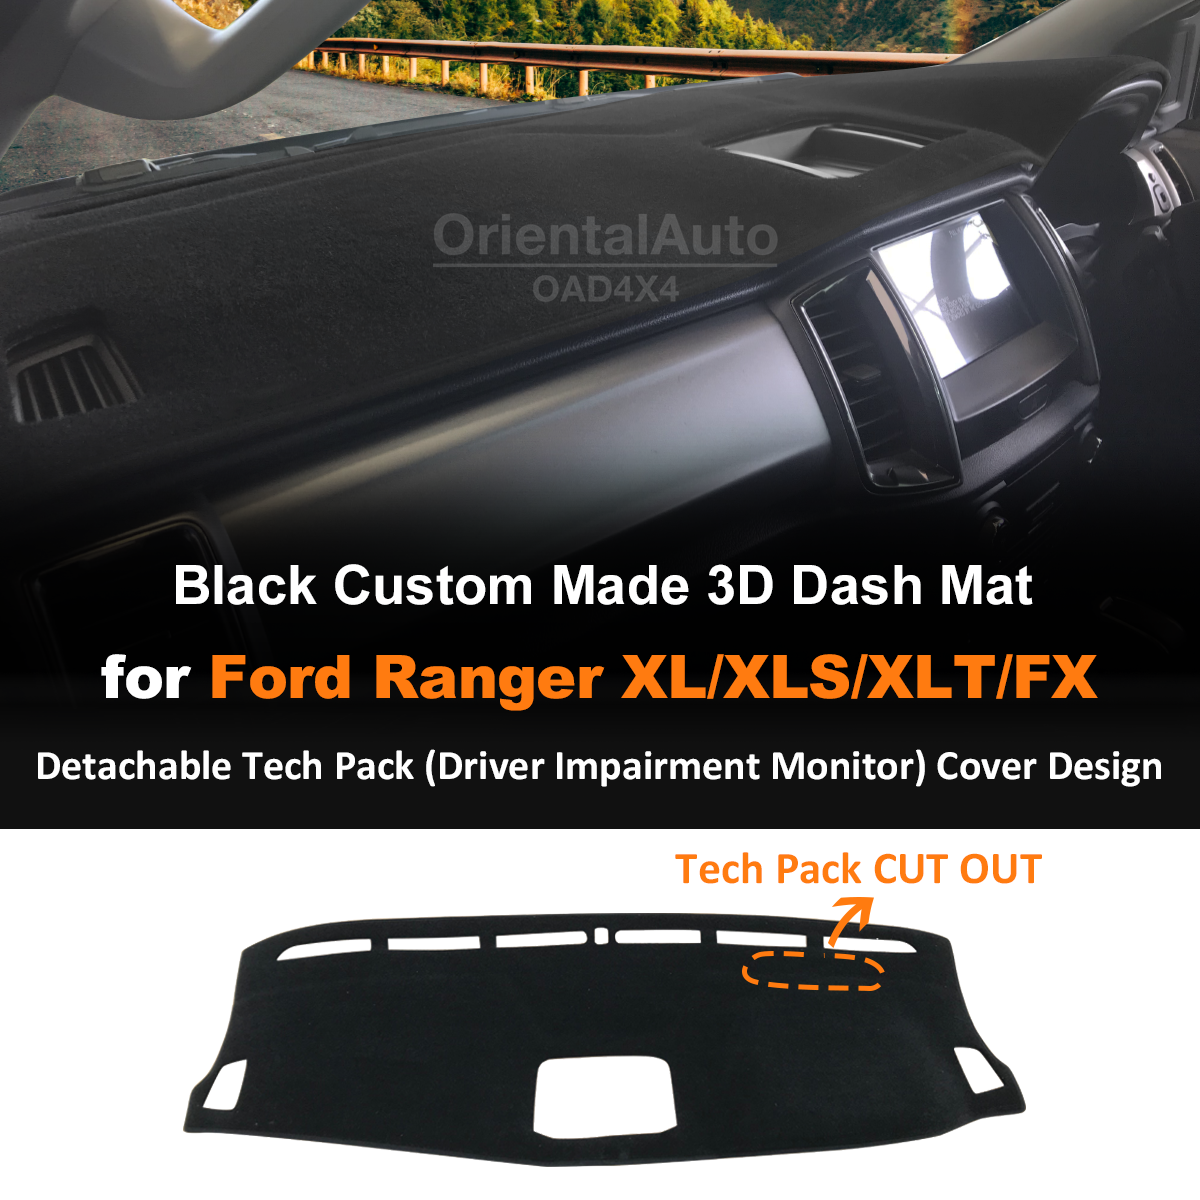 Injection Weather Shields & 3D Dash Mat For Ford Ranger XL/XLS/XLT/FX Dual Cab 2015-2022 Weathershields Window Visor + Dashboard Cover